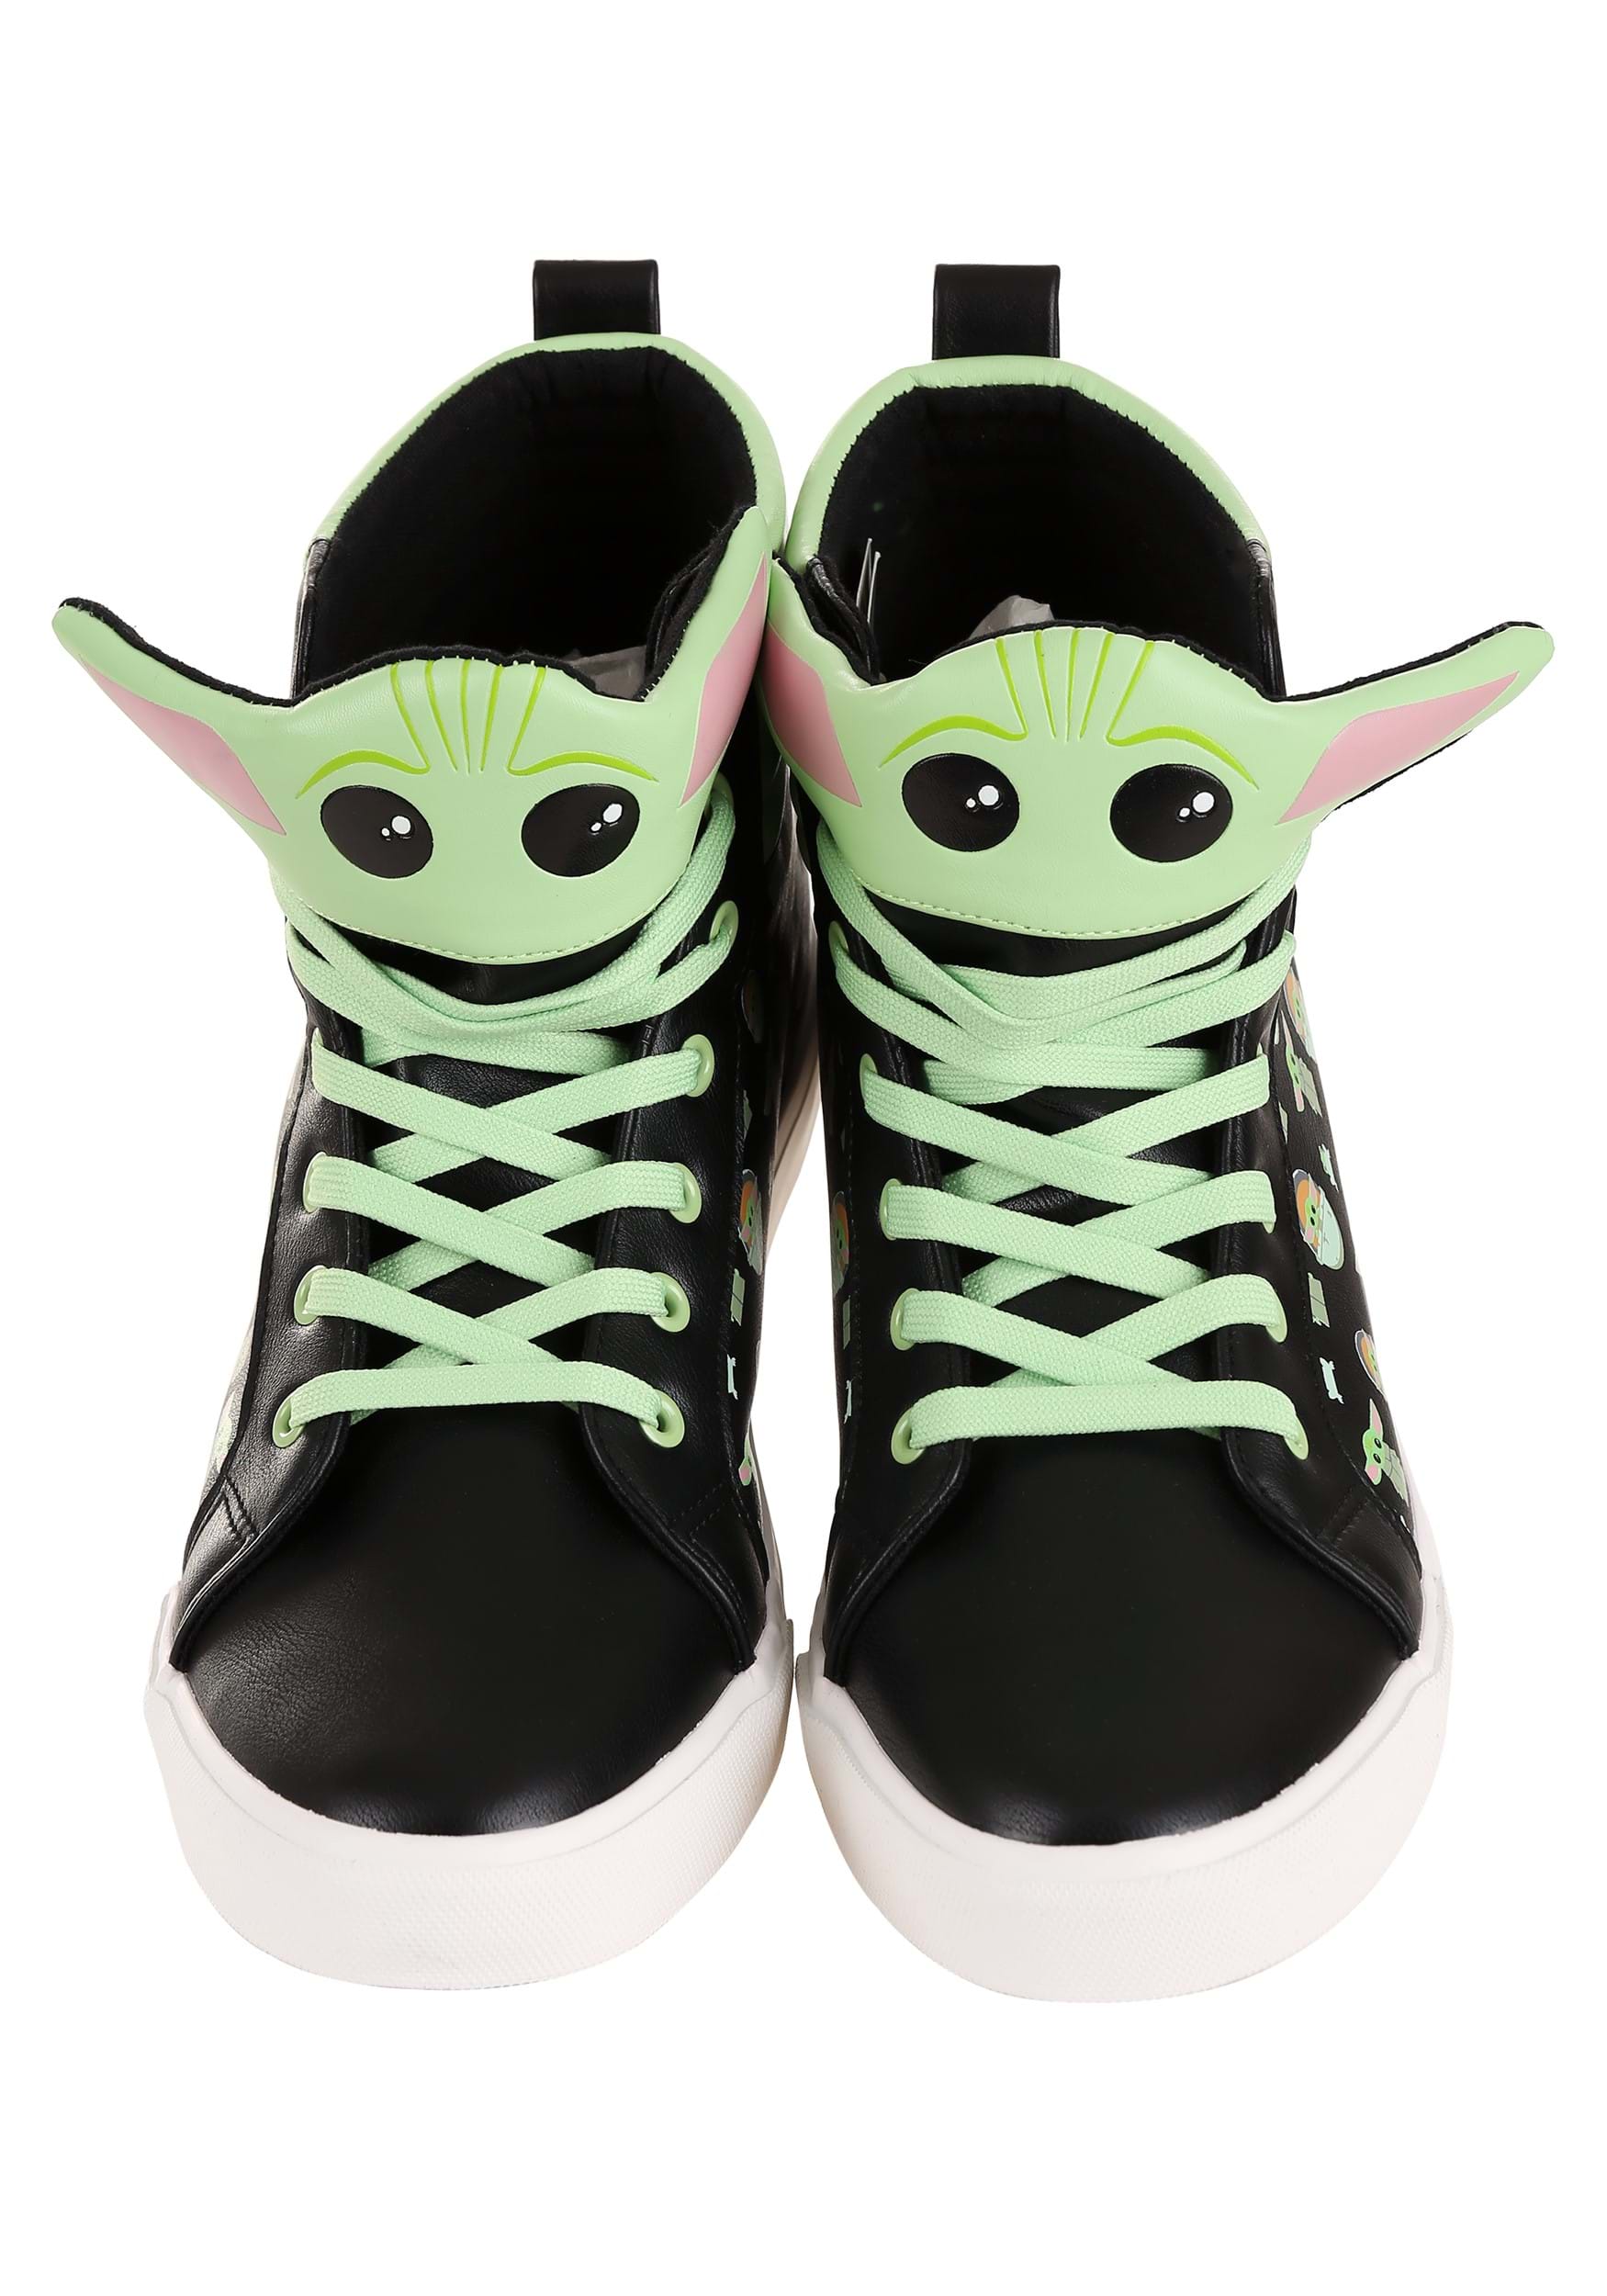 Star Wars Mandalorian The Child Adult Shoes